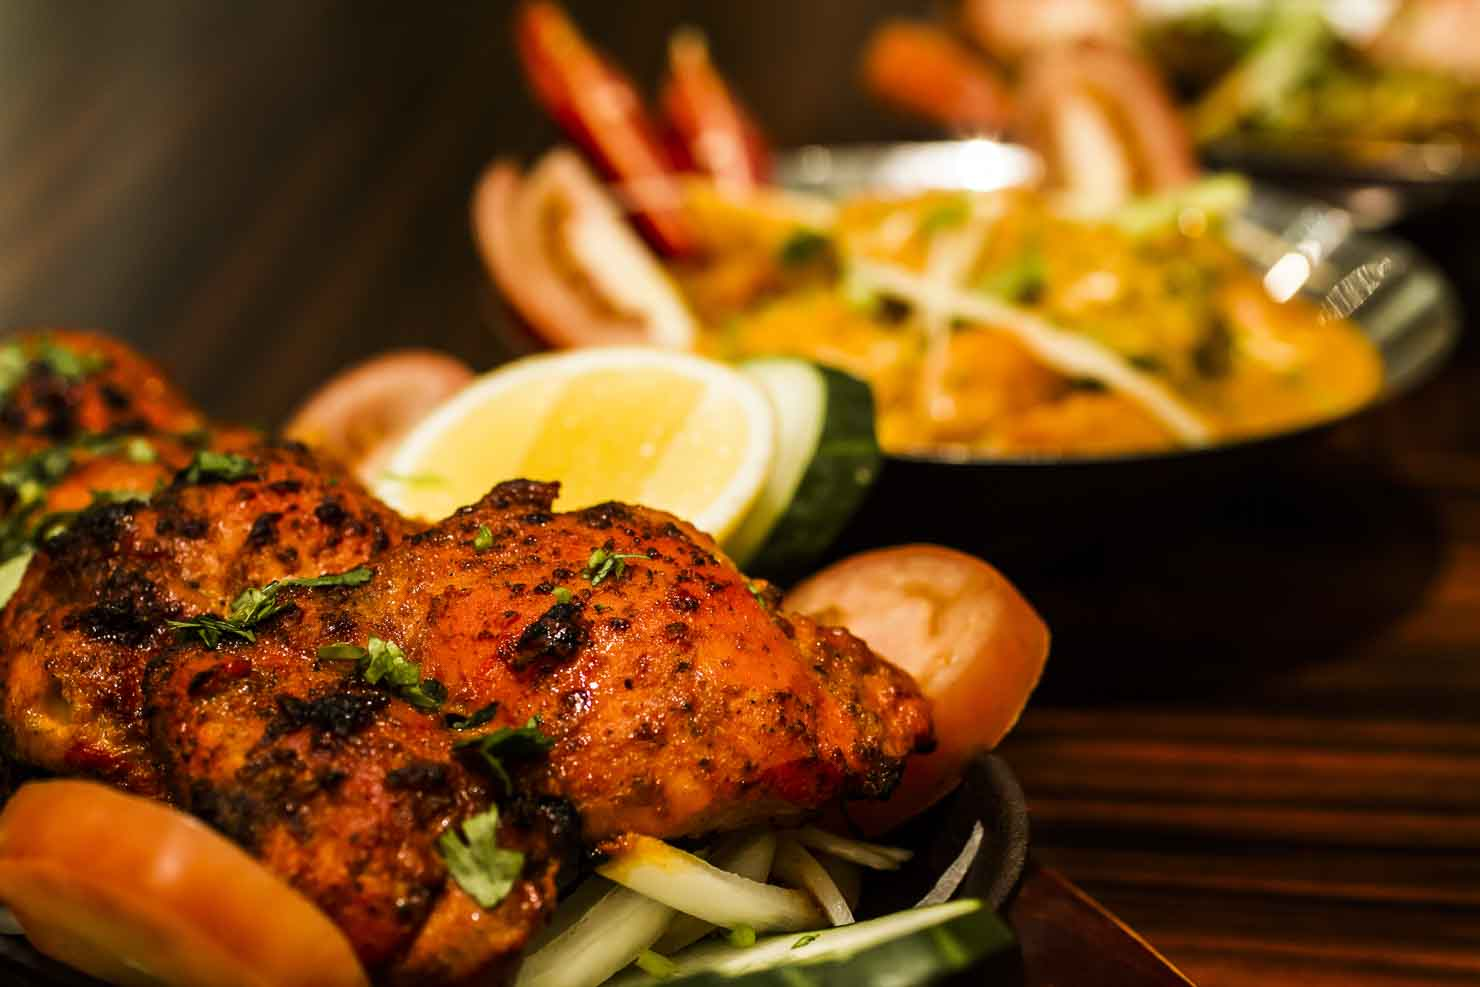 Delicious Tandoori Dishes for Takeaway from Swagath Biryani House in Wentworthville, Sydney NSW - Order Now!